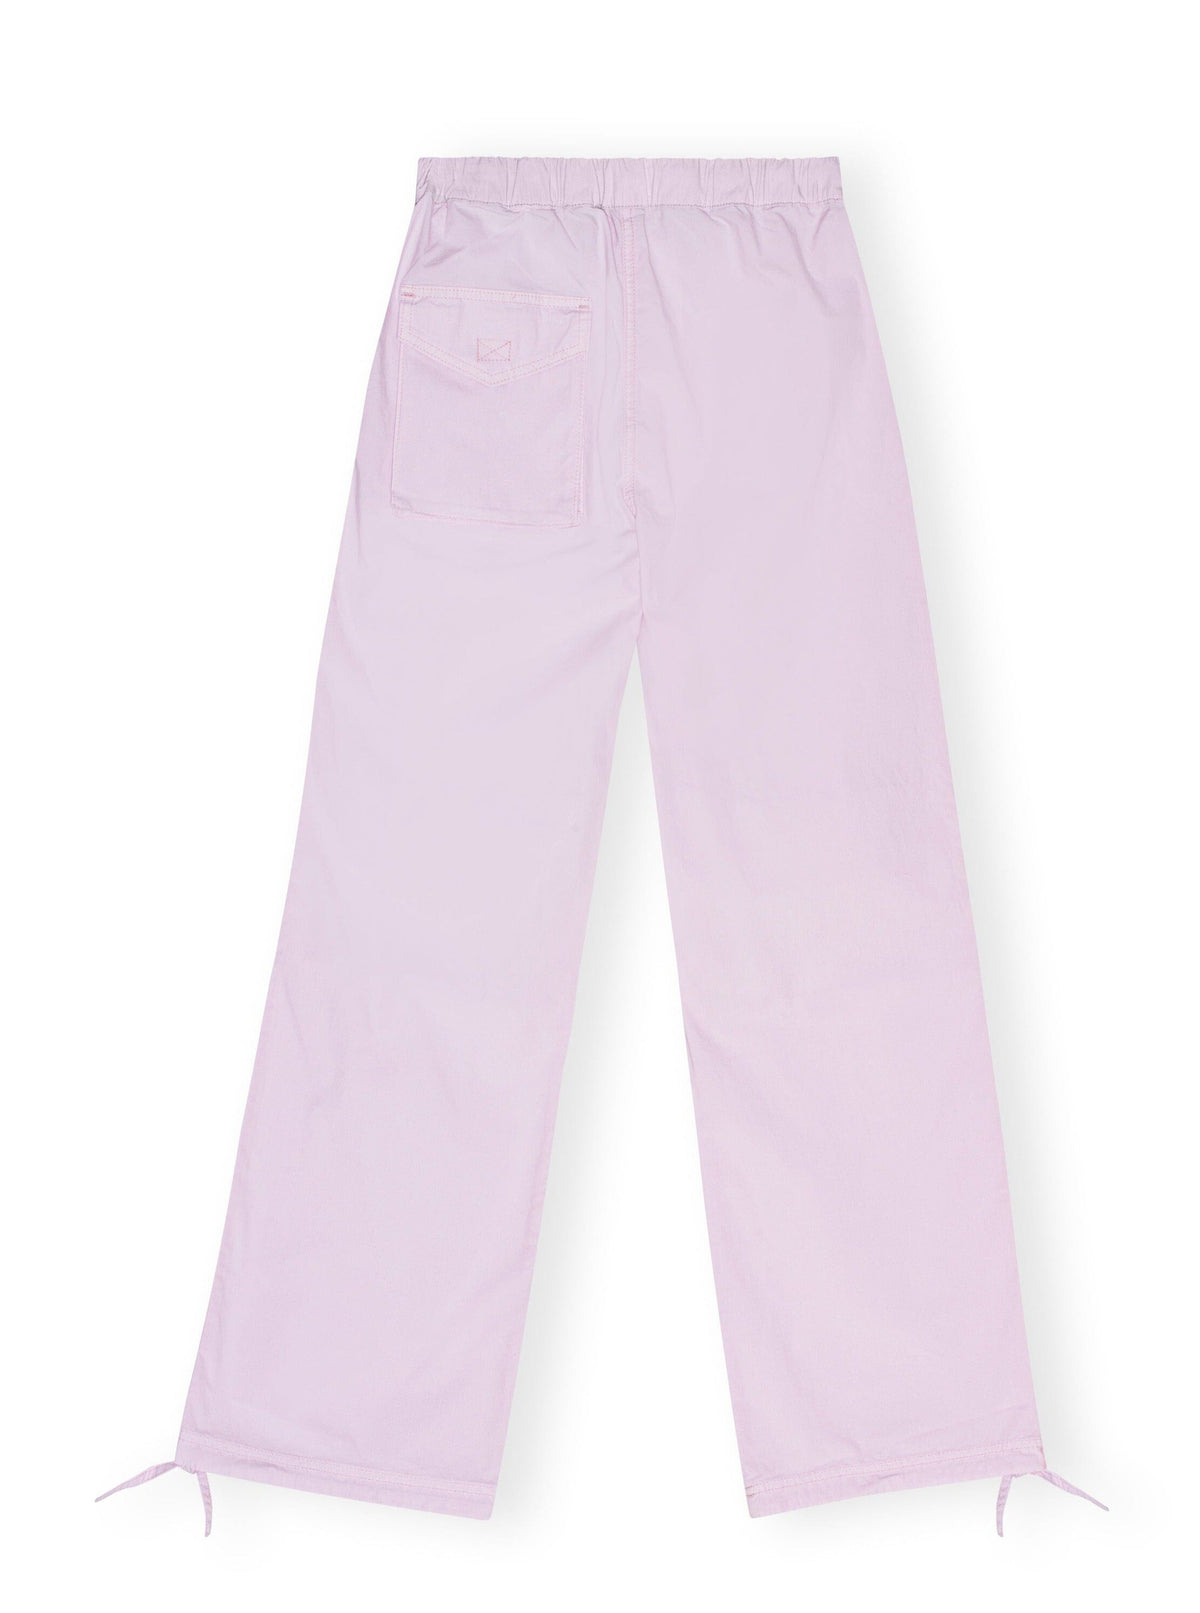 Washed Cotton Canvas Draw String Pants / Light Lilac Womens GANNI 